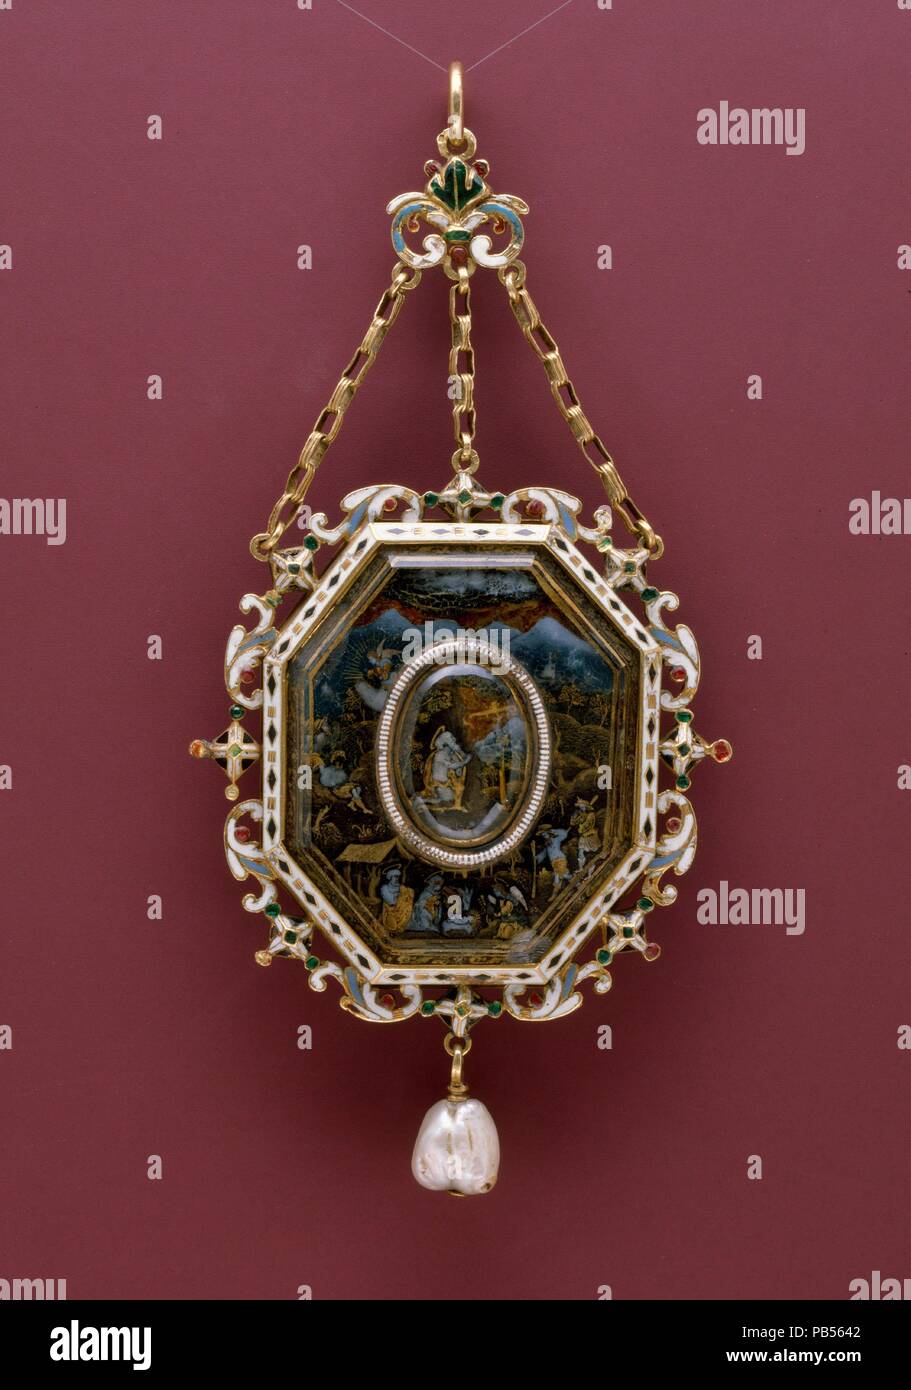 Pendant with Scenes from the Life of Christ and Two Saints. Culture: German or French. Designer: Reinhold Vasters (German, Erkelenz 1827-1909 Aachen). Dimensions: Height: 5 1/4 in. (13.3 cm). Date: ca. 1870-95.  The frame of this pendant was made from an unpublished design by Reinhold Vasters in the collection of the Victoria and Albert Museum, London (inv. No. E 3569-1919). The pendant is based on a sixteenth-century type believed to have been made in northern Italy or perhaps Spain. Faith Dennis published an example from the J. Pierpont Morgan Collection in The Metropolitan Museum of Art (17 Stock Photo